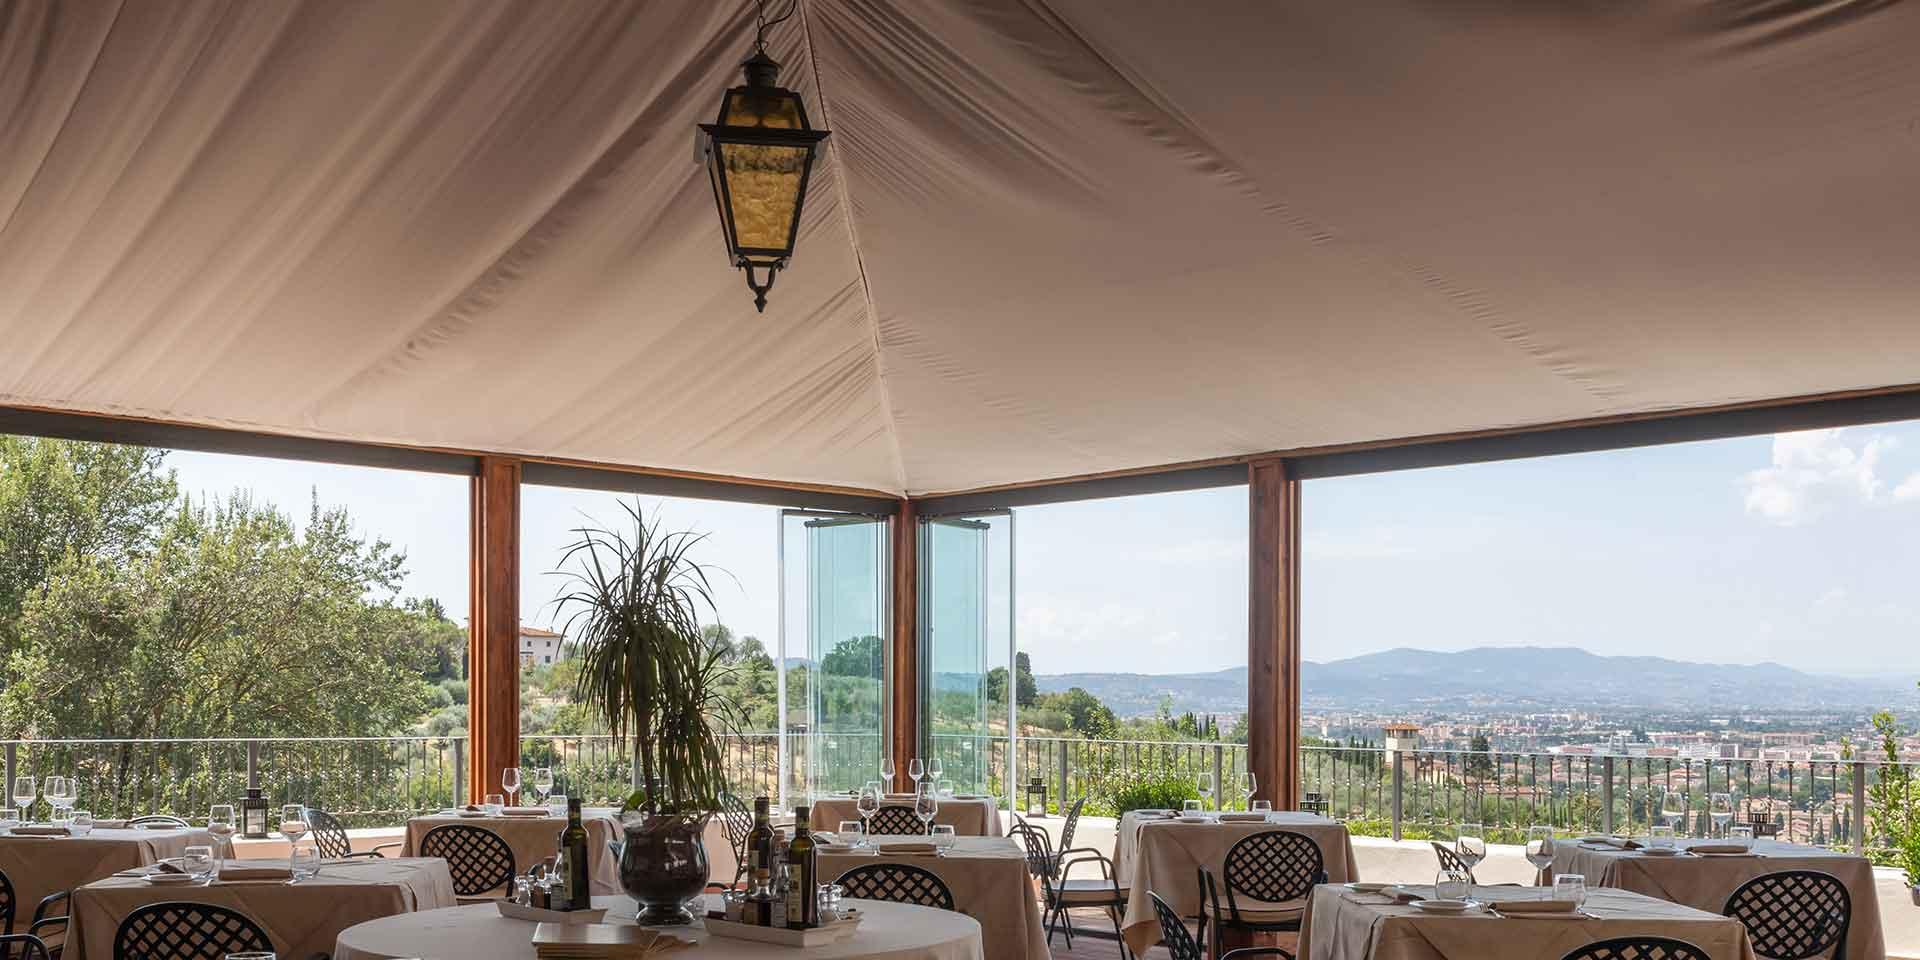 Photo Gallery Autumn Getaway Exclusive Room & Dining @ Villa Tolomei - Florence